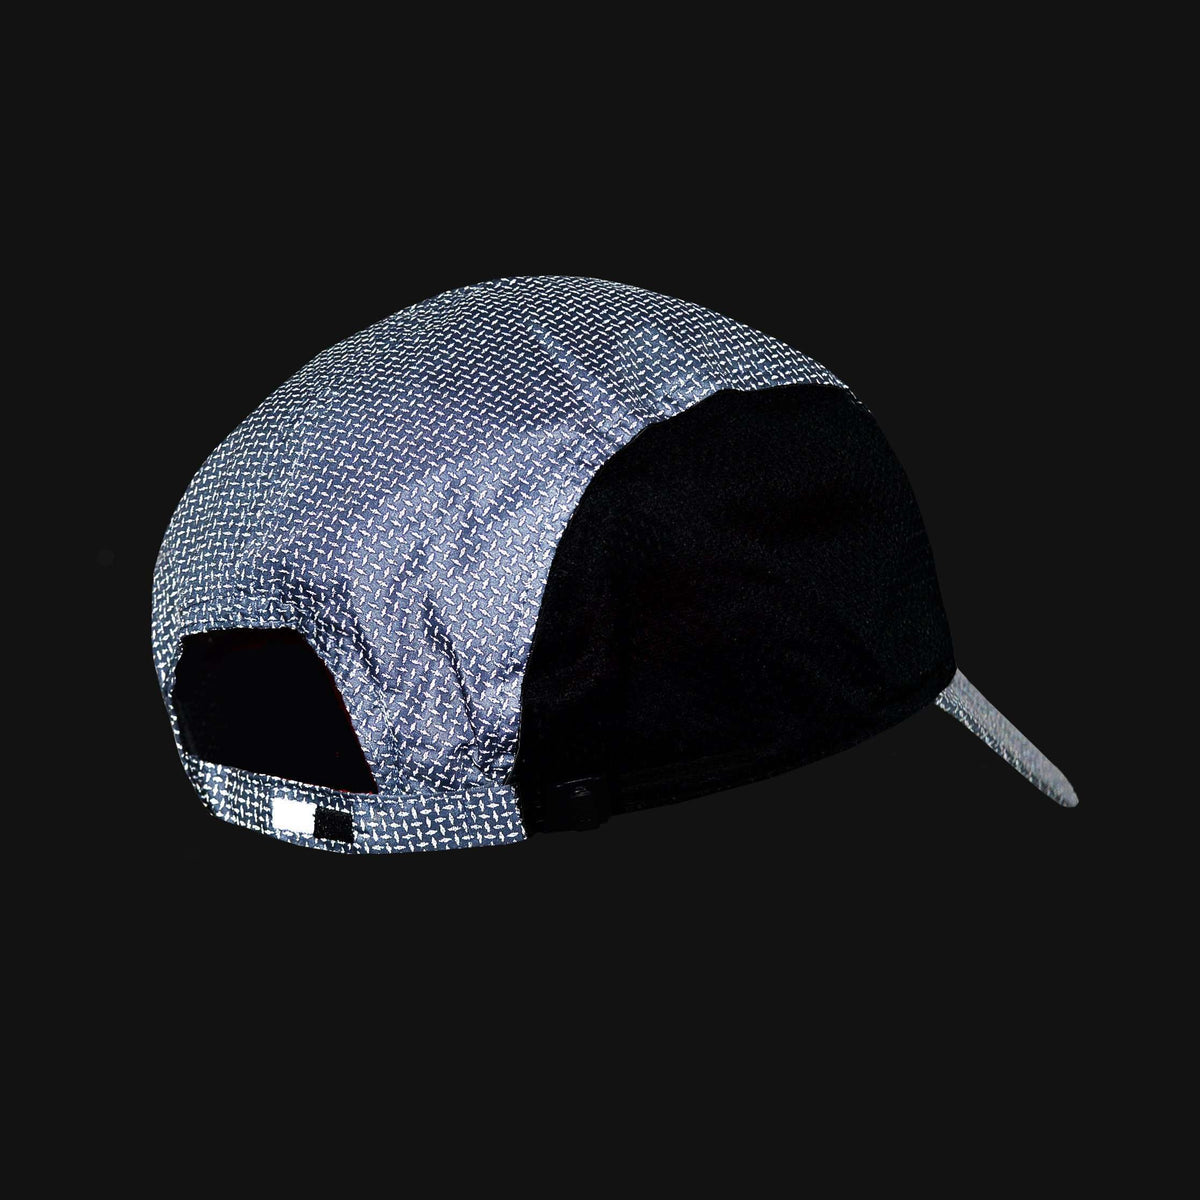 Primo Lid Mesh-Sided Baseball Cap in Reflective Black Roma